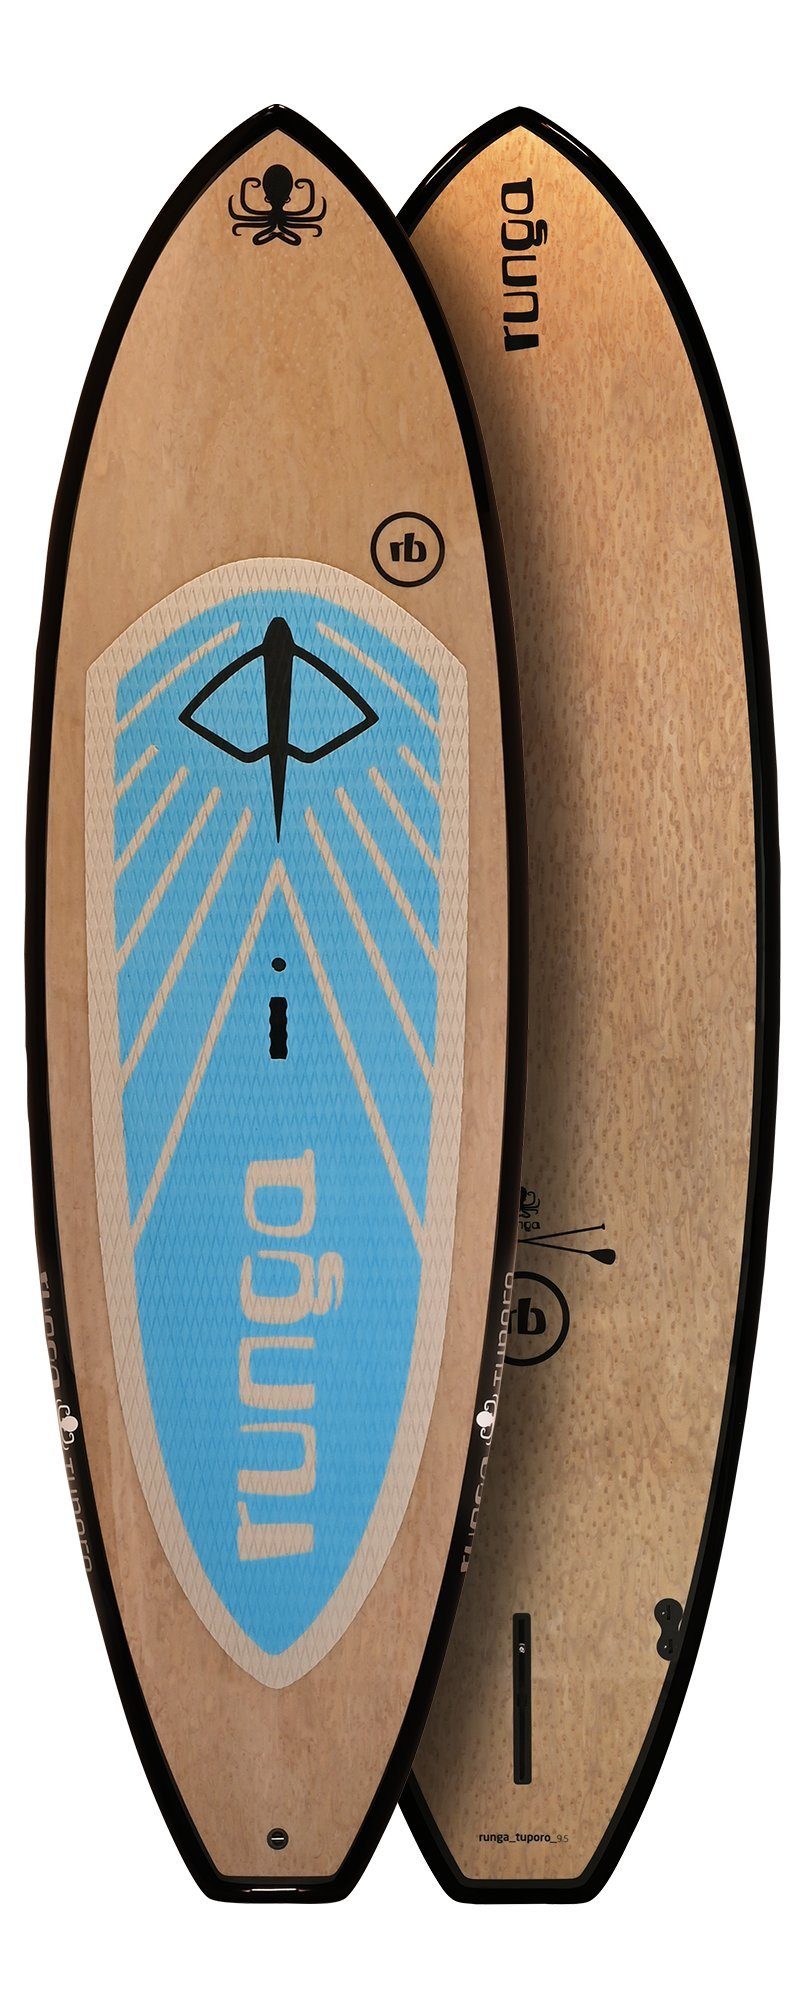 Runga-Boards SUP-Board Runga TUPORO 3-tlg. Coiled Paddling Board Stand Hard (10.0, inkl. Finnen-Set) BLUE SUP, Lash Up &